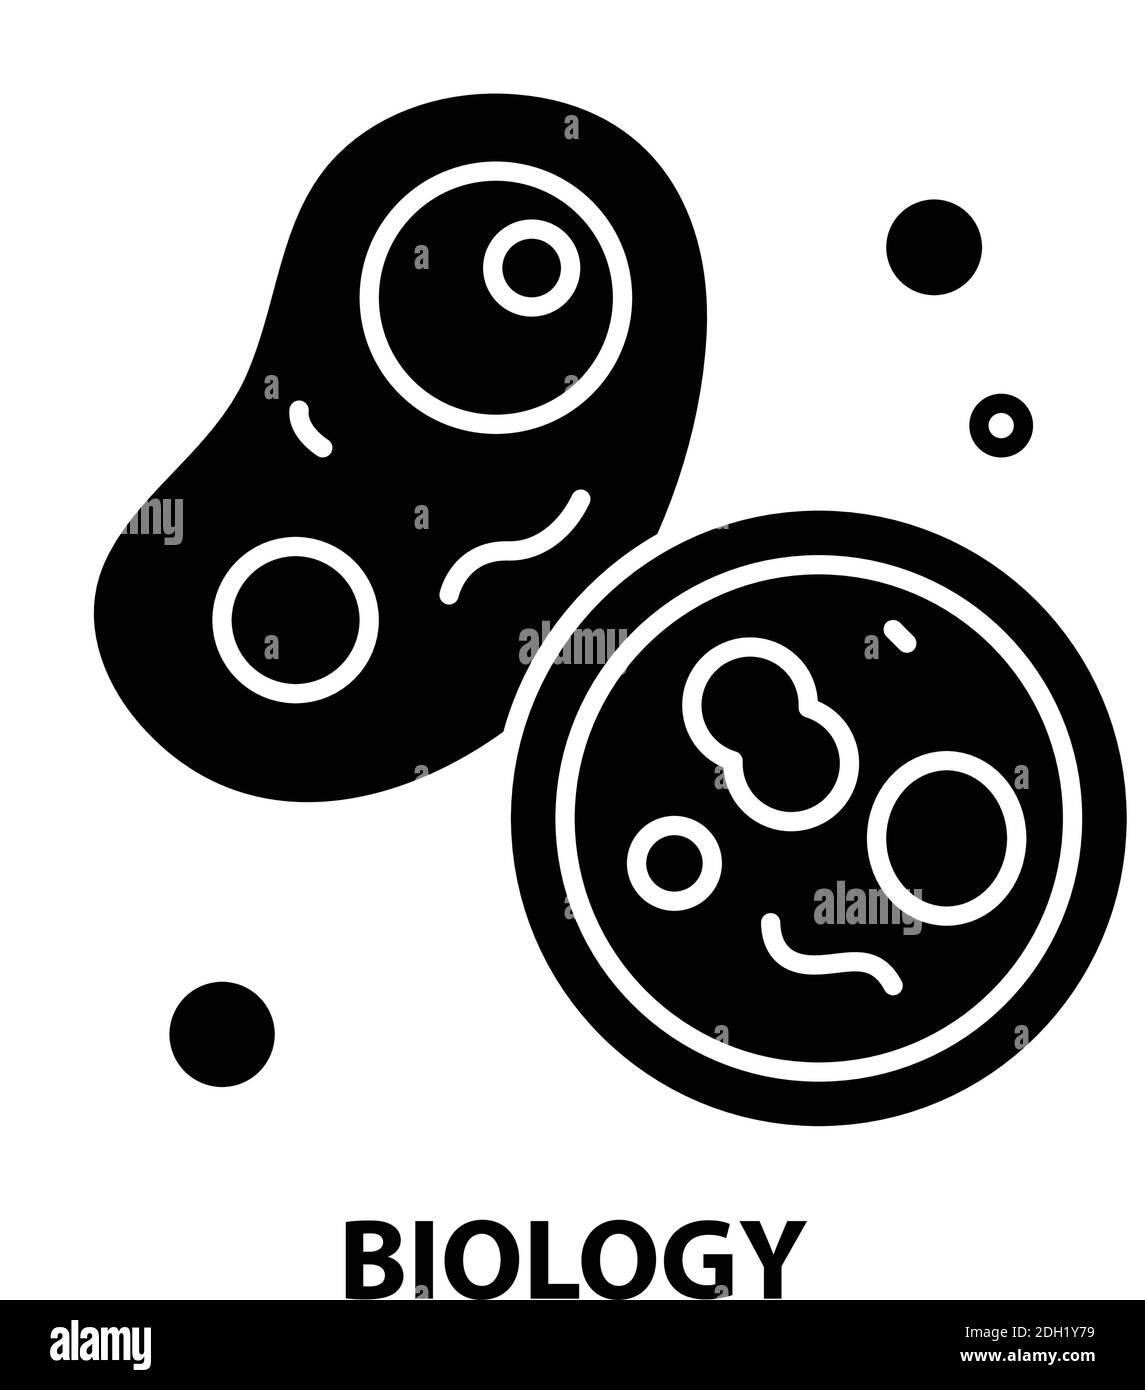 biology icon, black vector sign with editable strokes, concept illustration Stock Vector